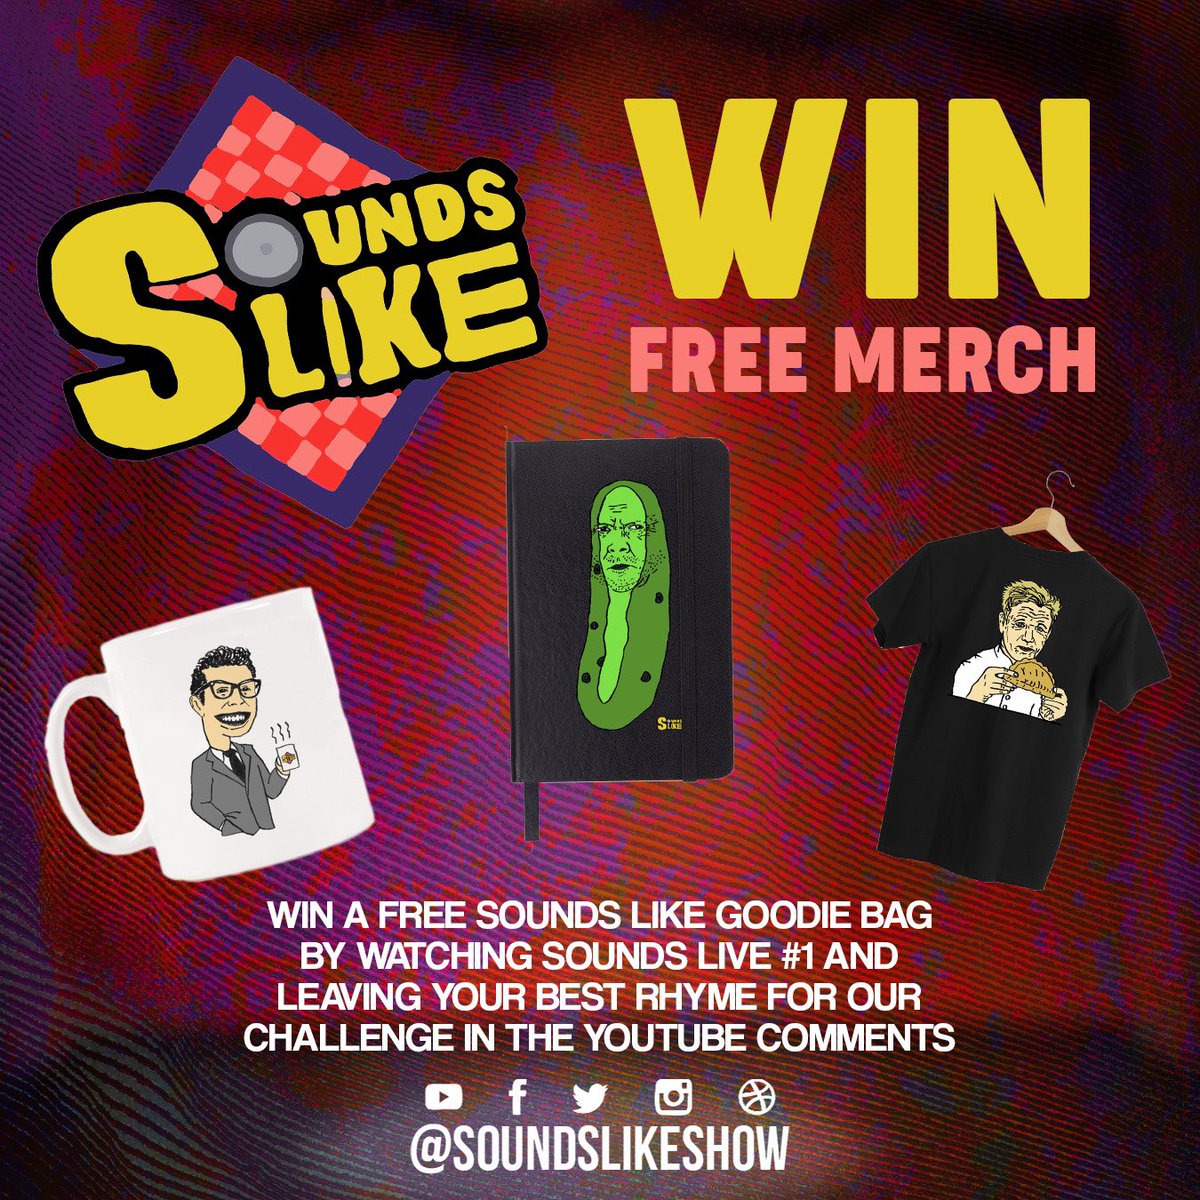 Competition time - jump in feet first,
Watch Sounds Live episode 1 as research,
Listen to the rhyming challenge - comment rhyming key words,
And you could win a goodie bag of  Sounds Like free merch,
Like this mug, notebook and Gordon Ramsay T-shirt!

https://t.co/9NdhXjerl6 https://t.co/Pwv4i20iQl